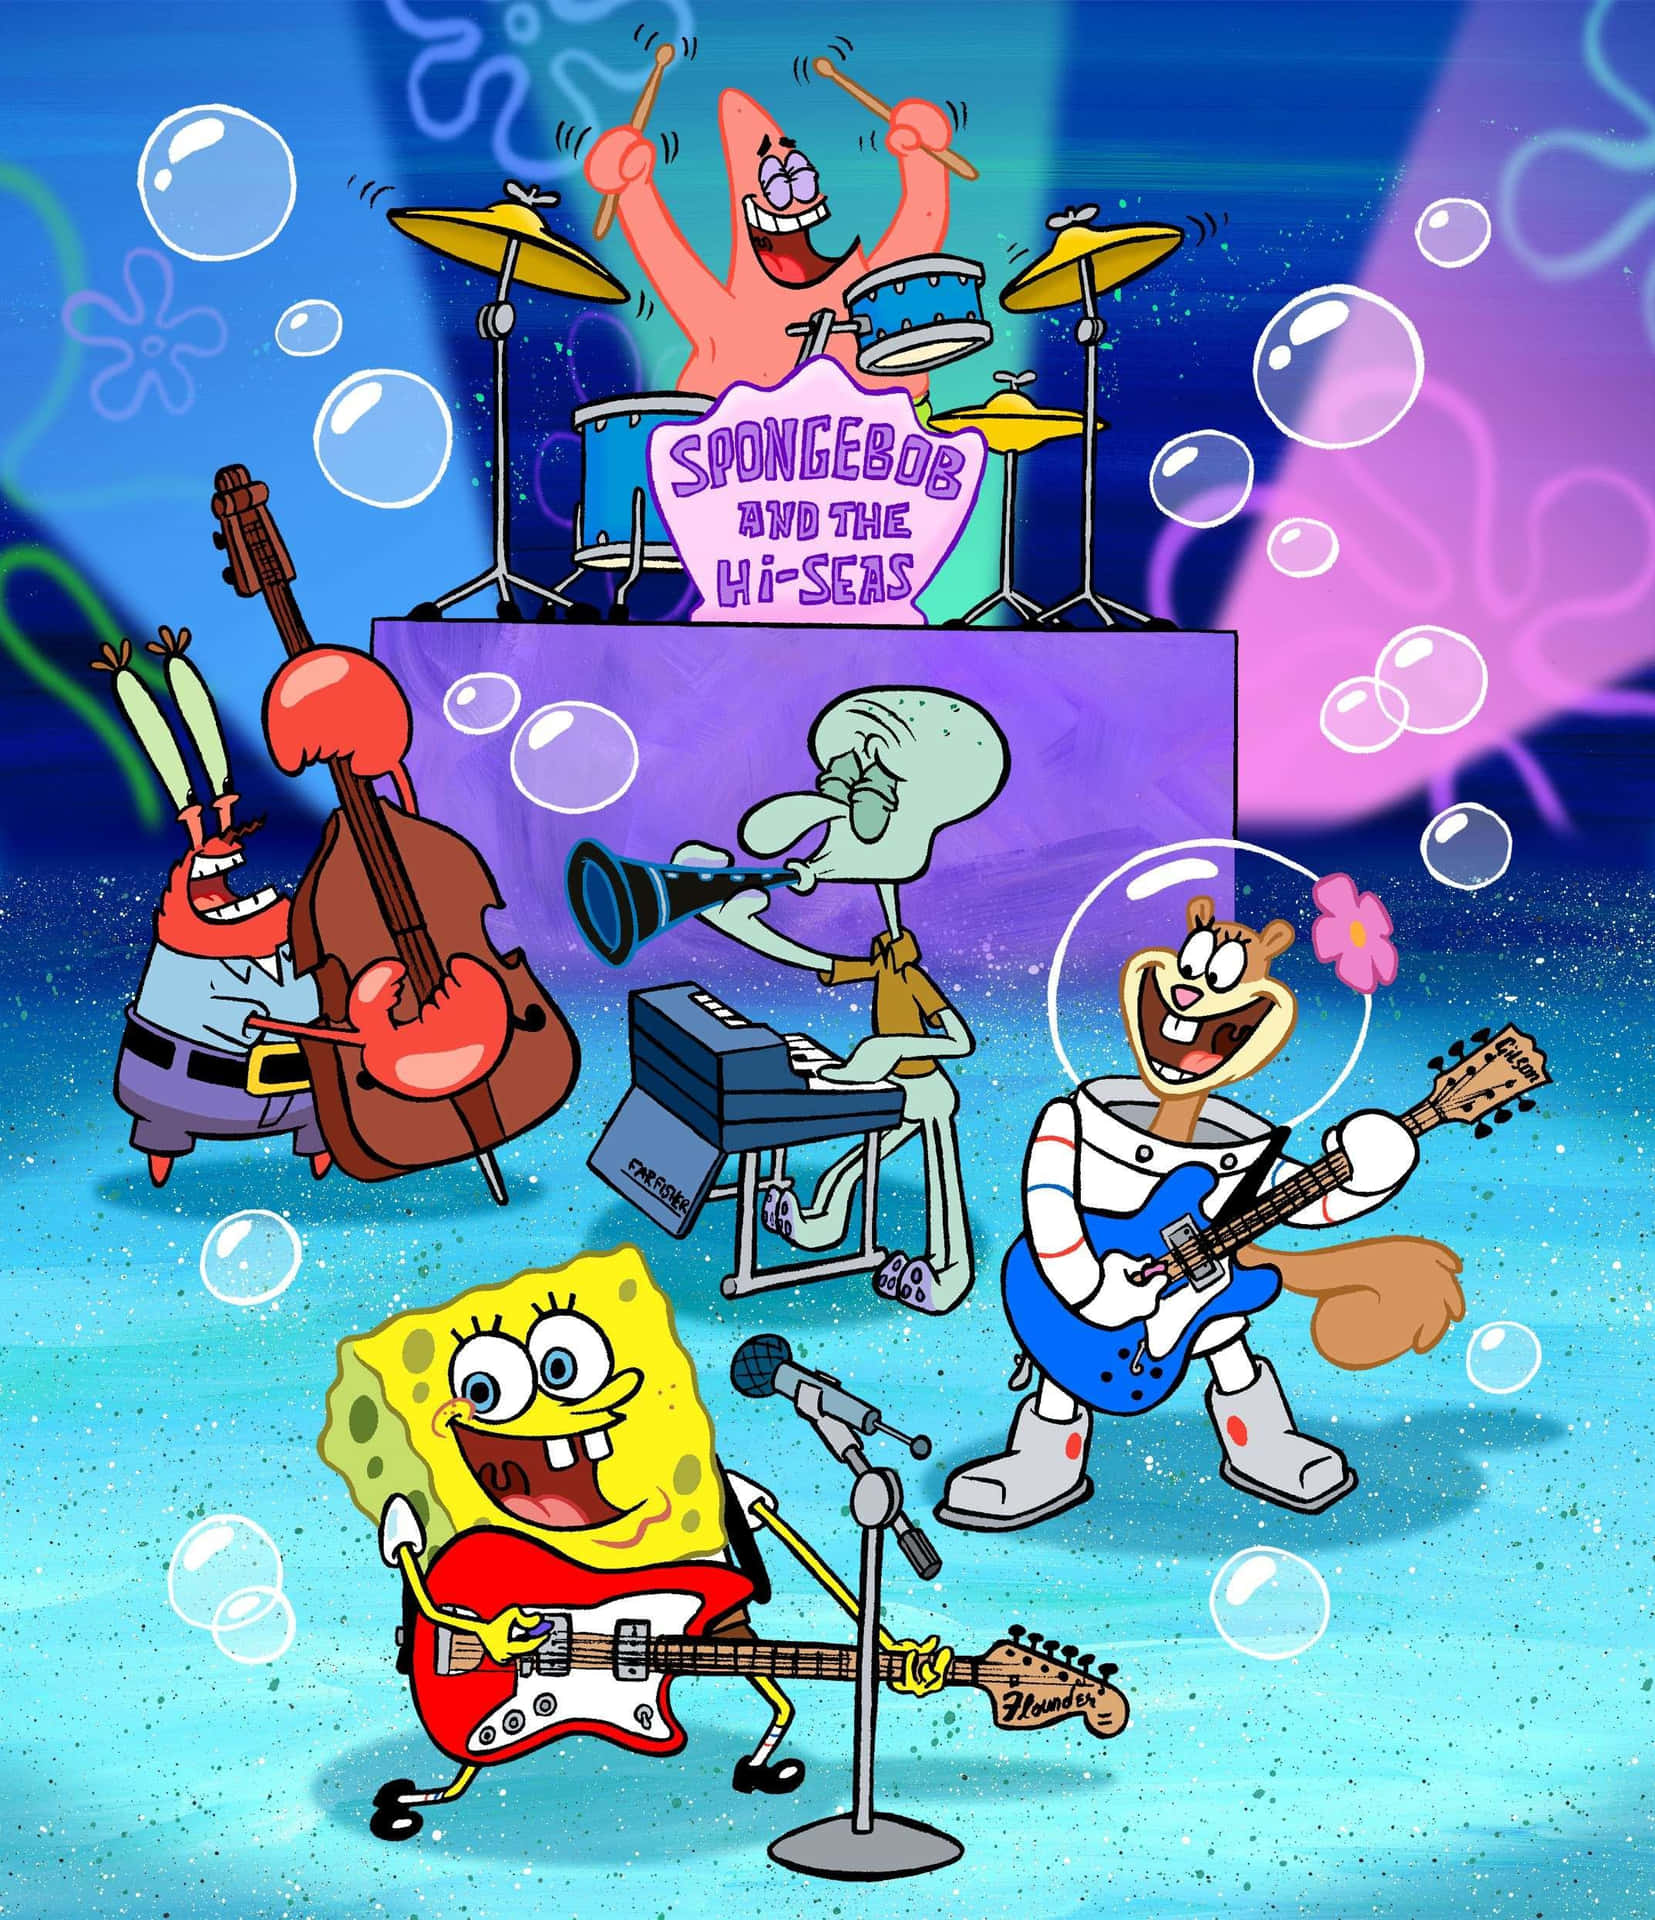 All of your favorite Spongebob characters in one place Wallpaper